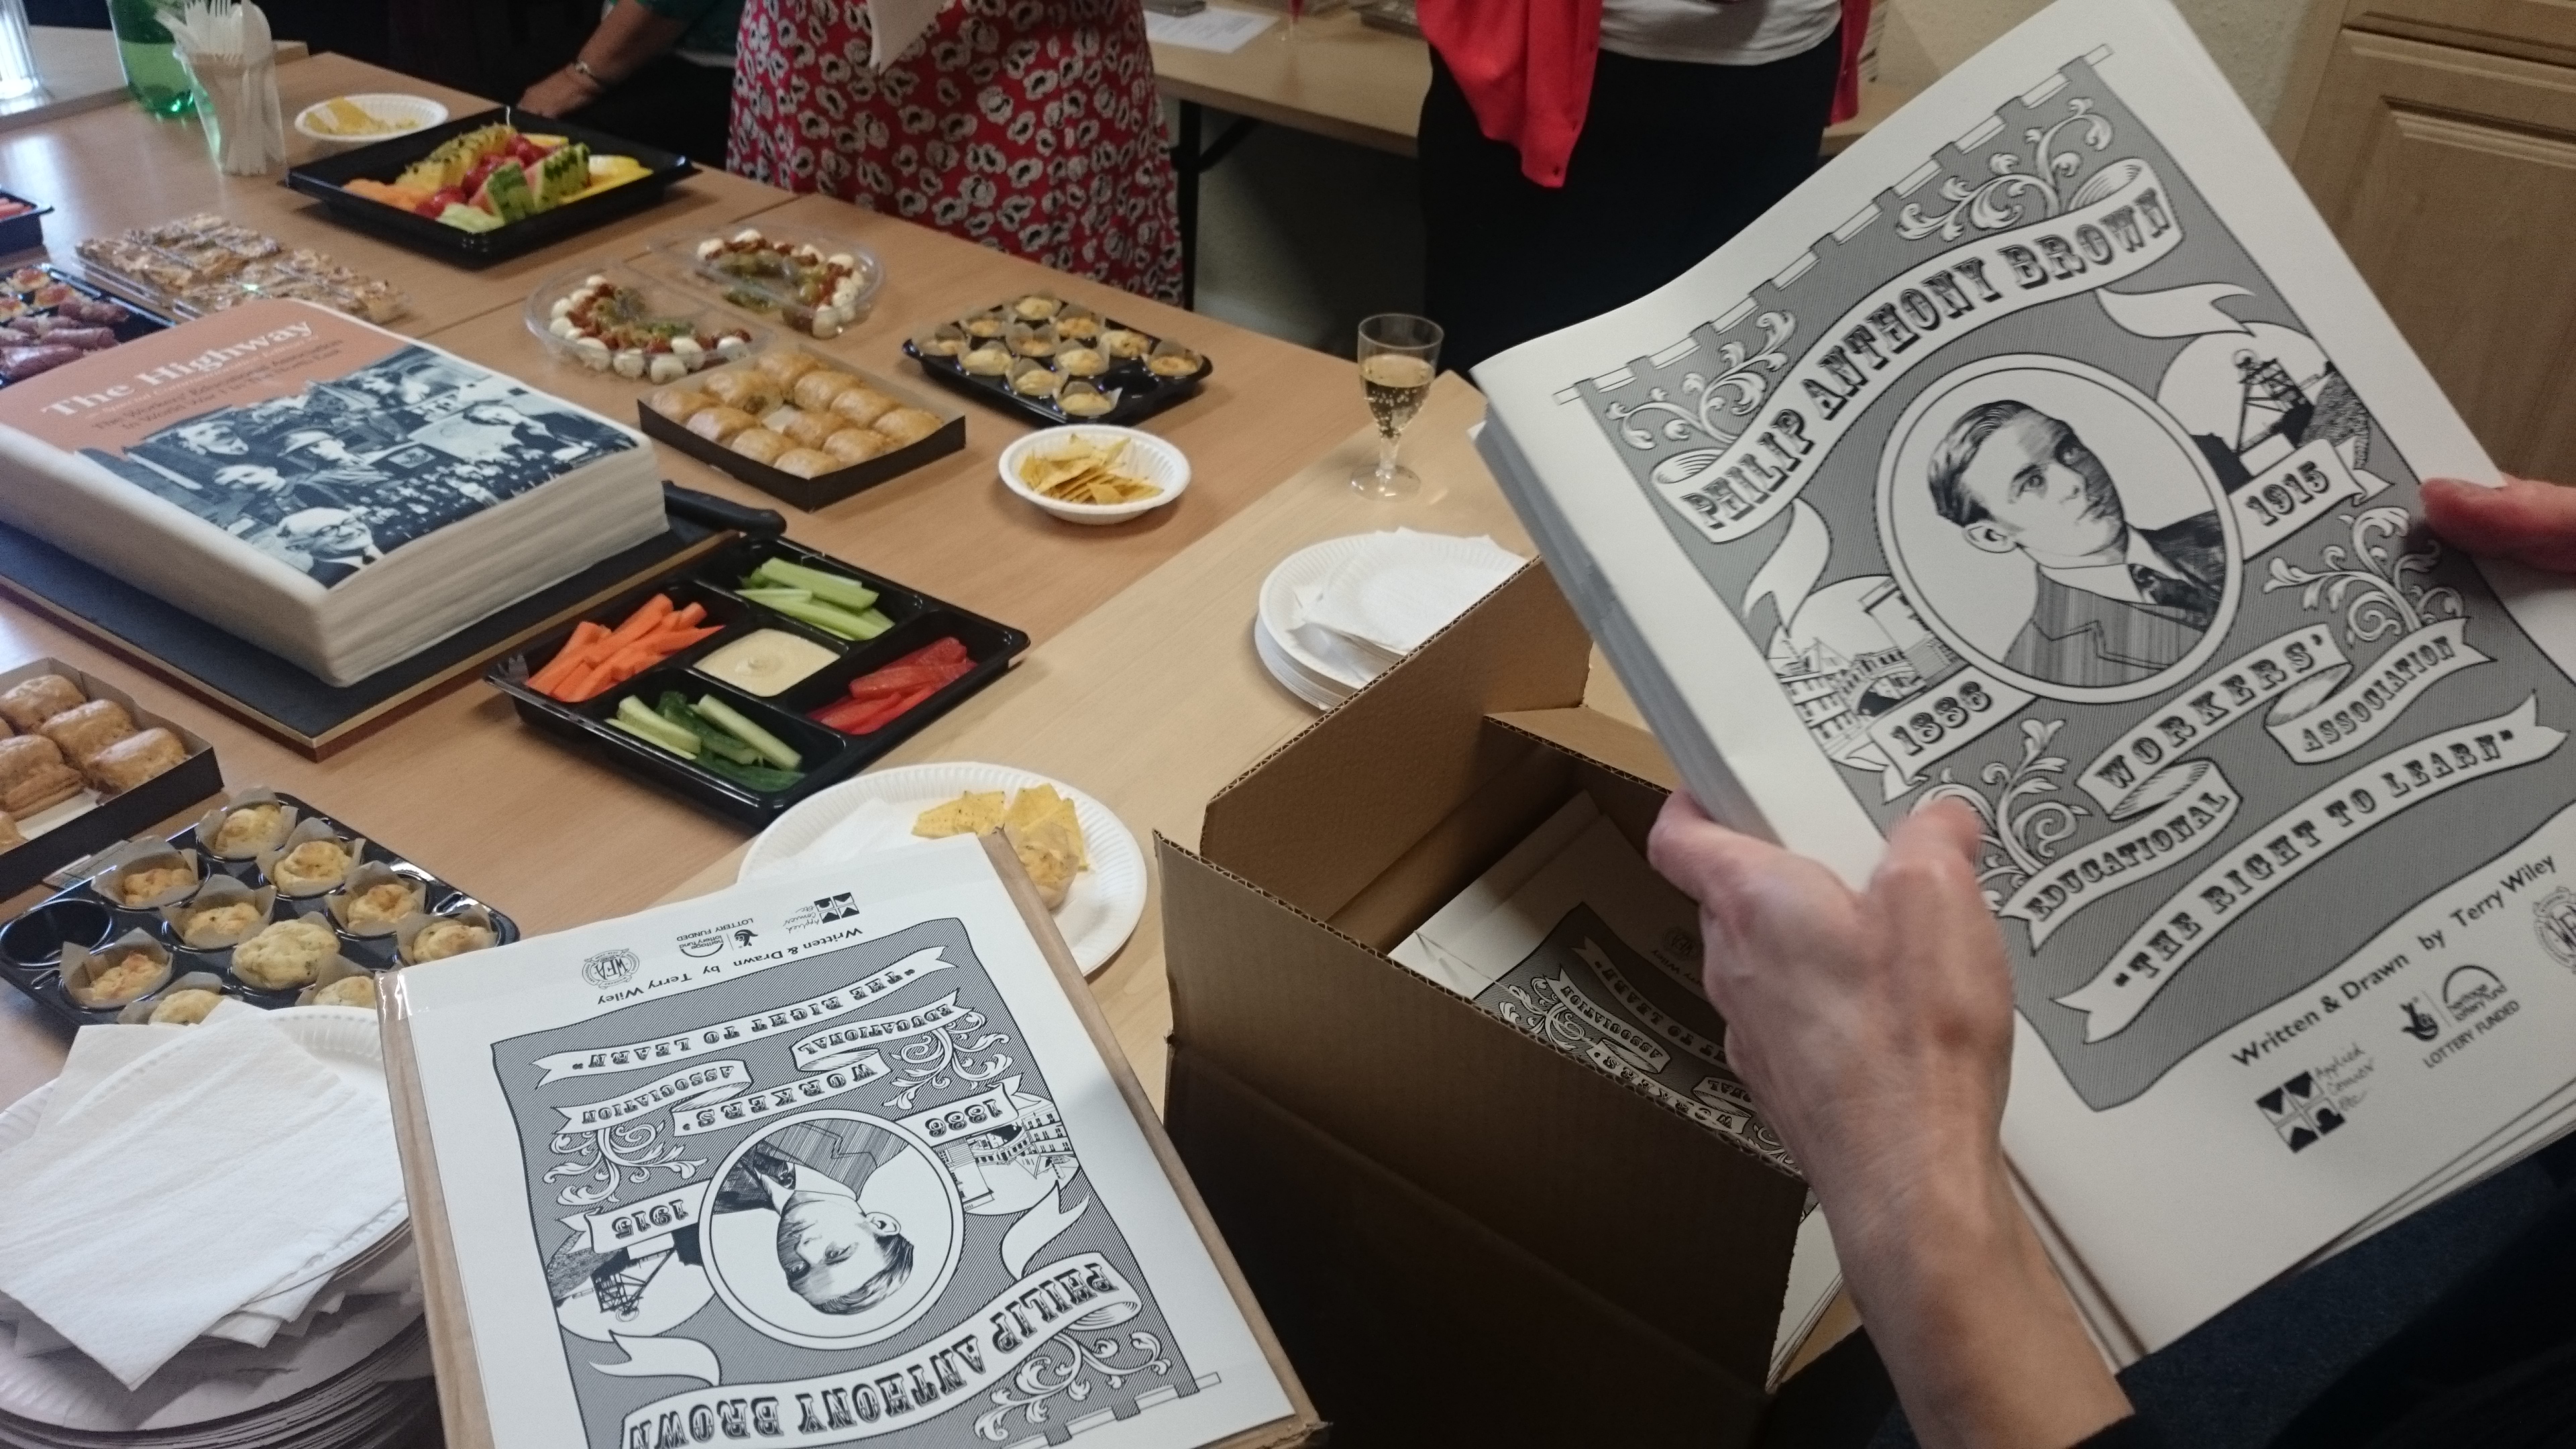 Unboxing 'The Right To Learn' comic at the WEA's project launch party